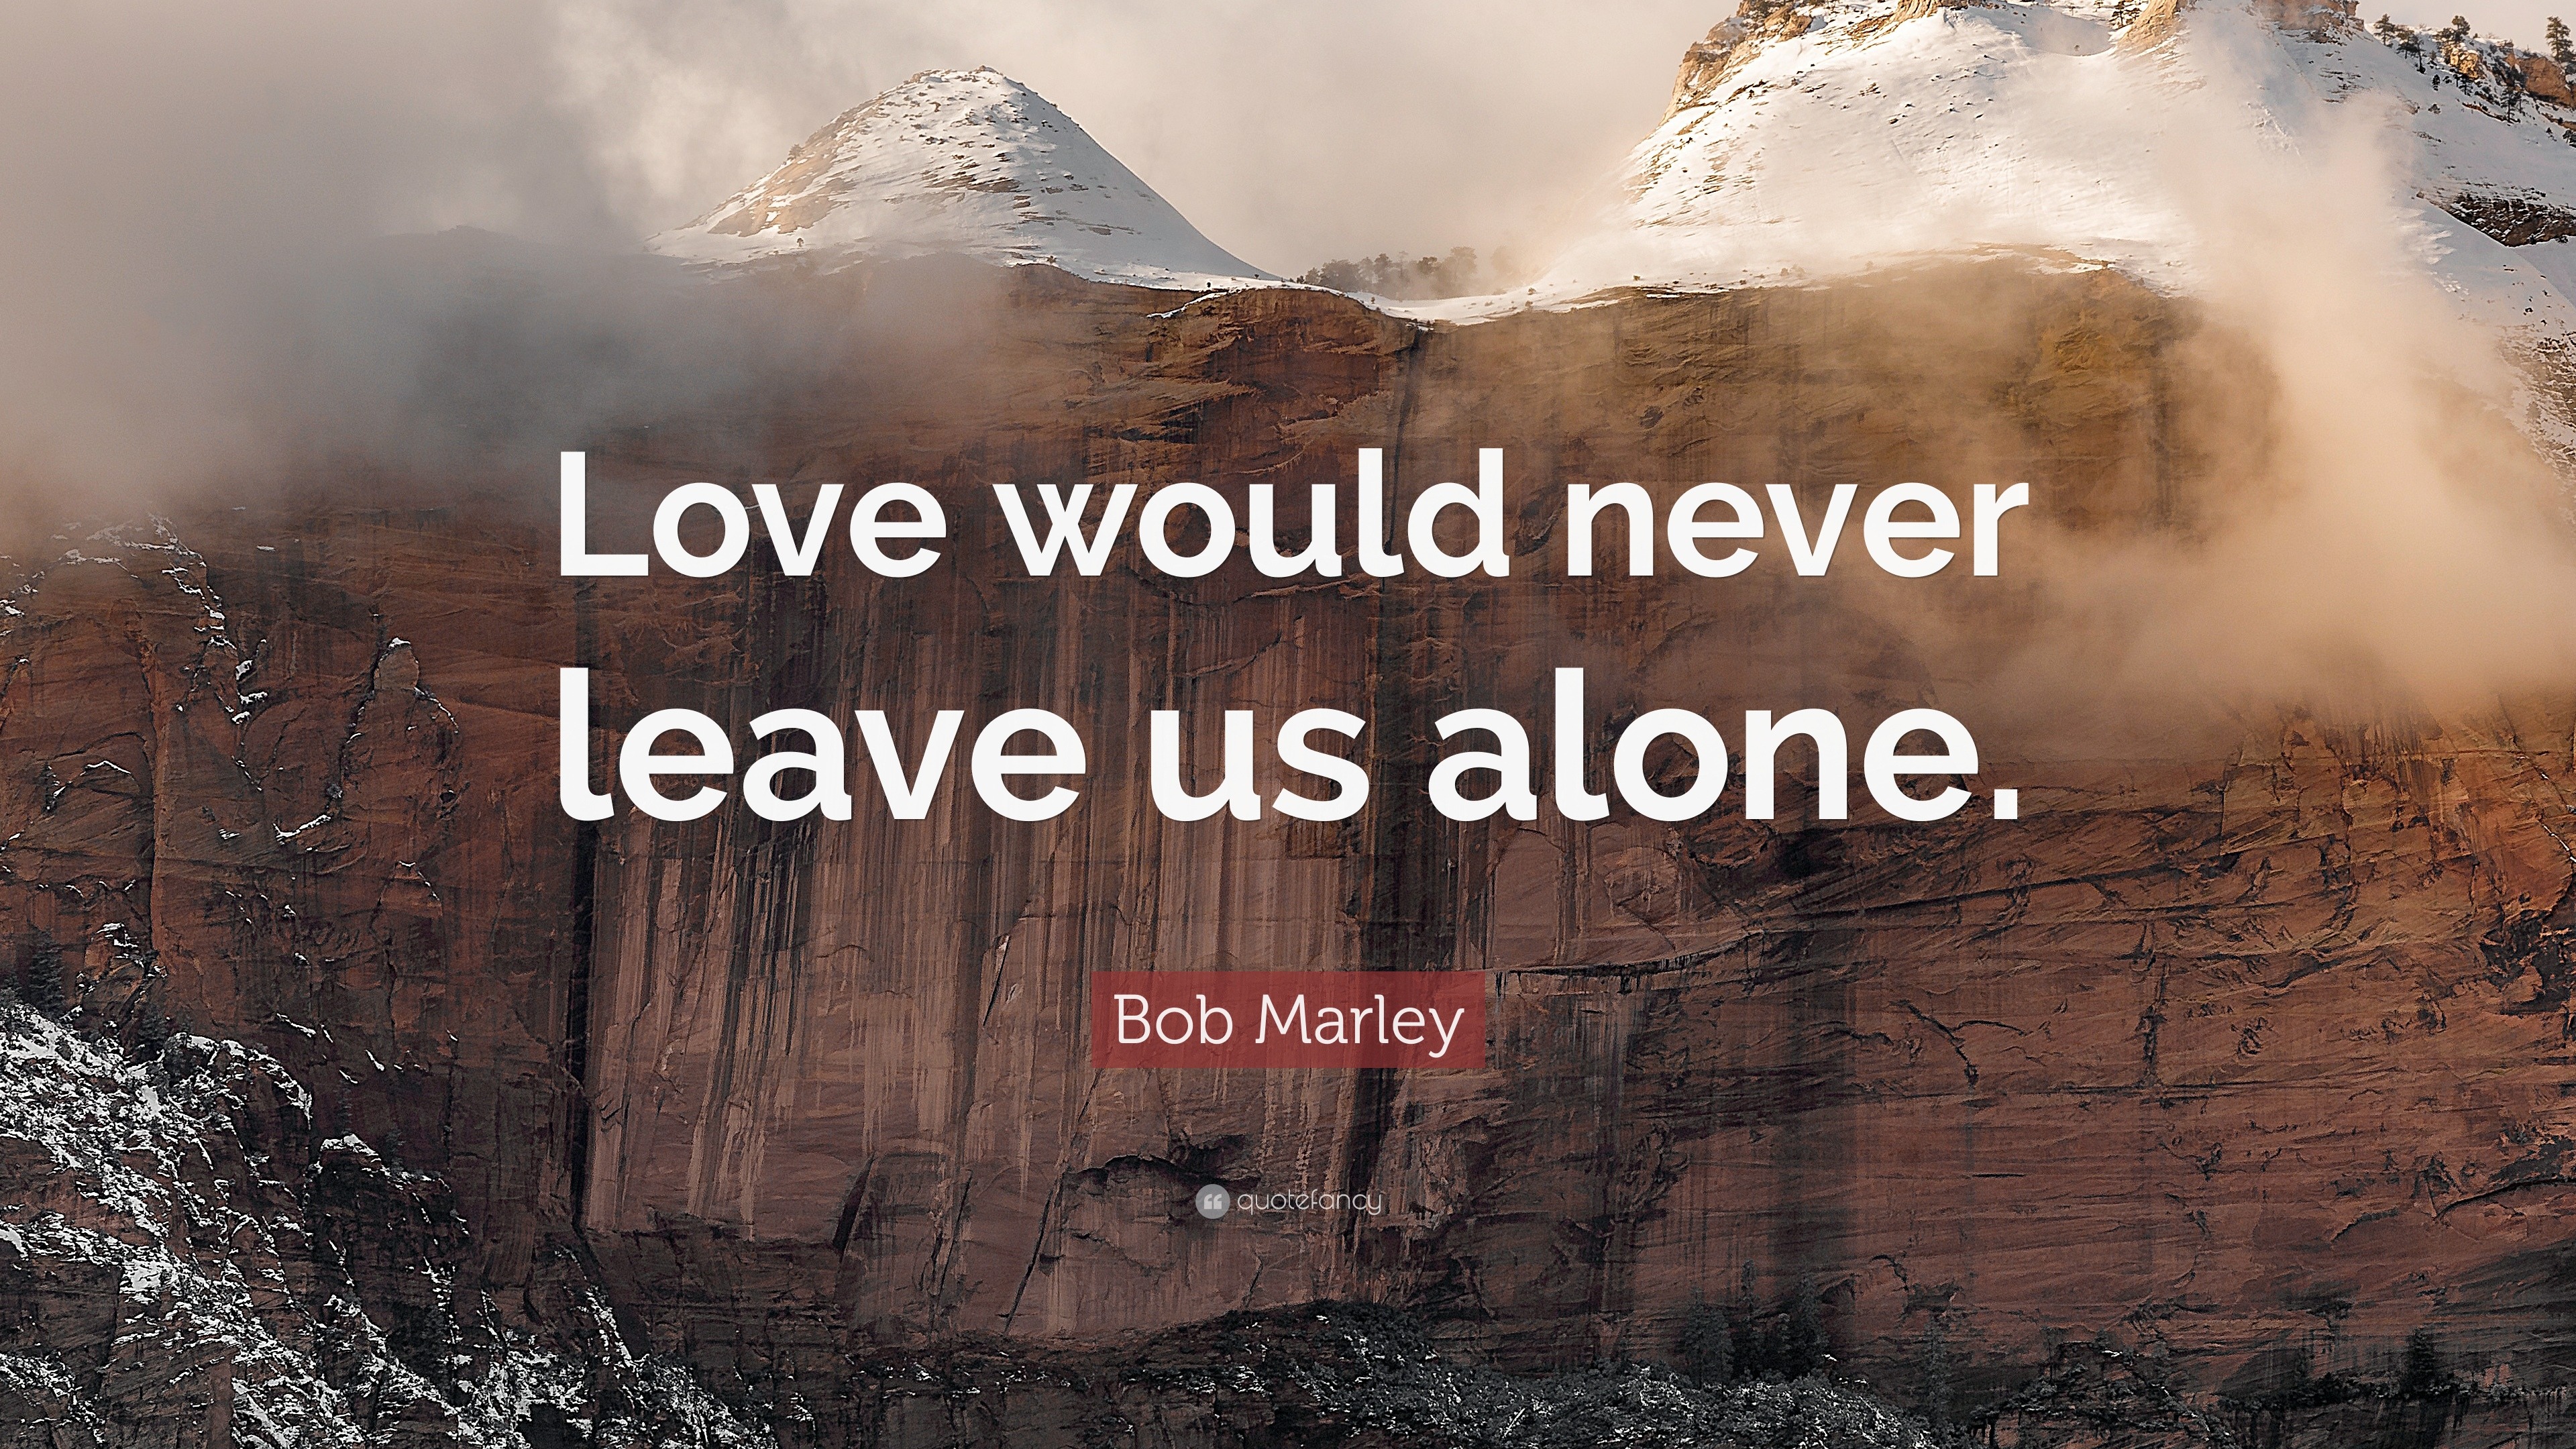 Bob Marley Quote: “Love would never leave us alone.”